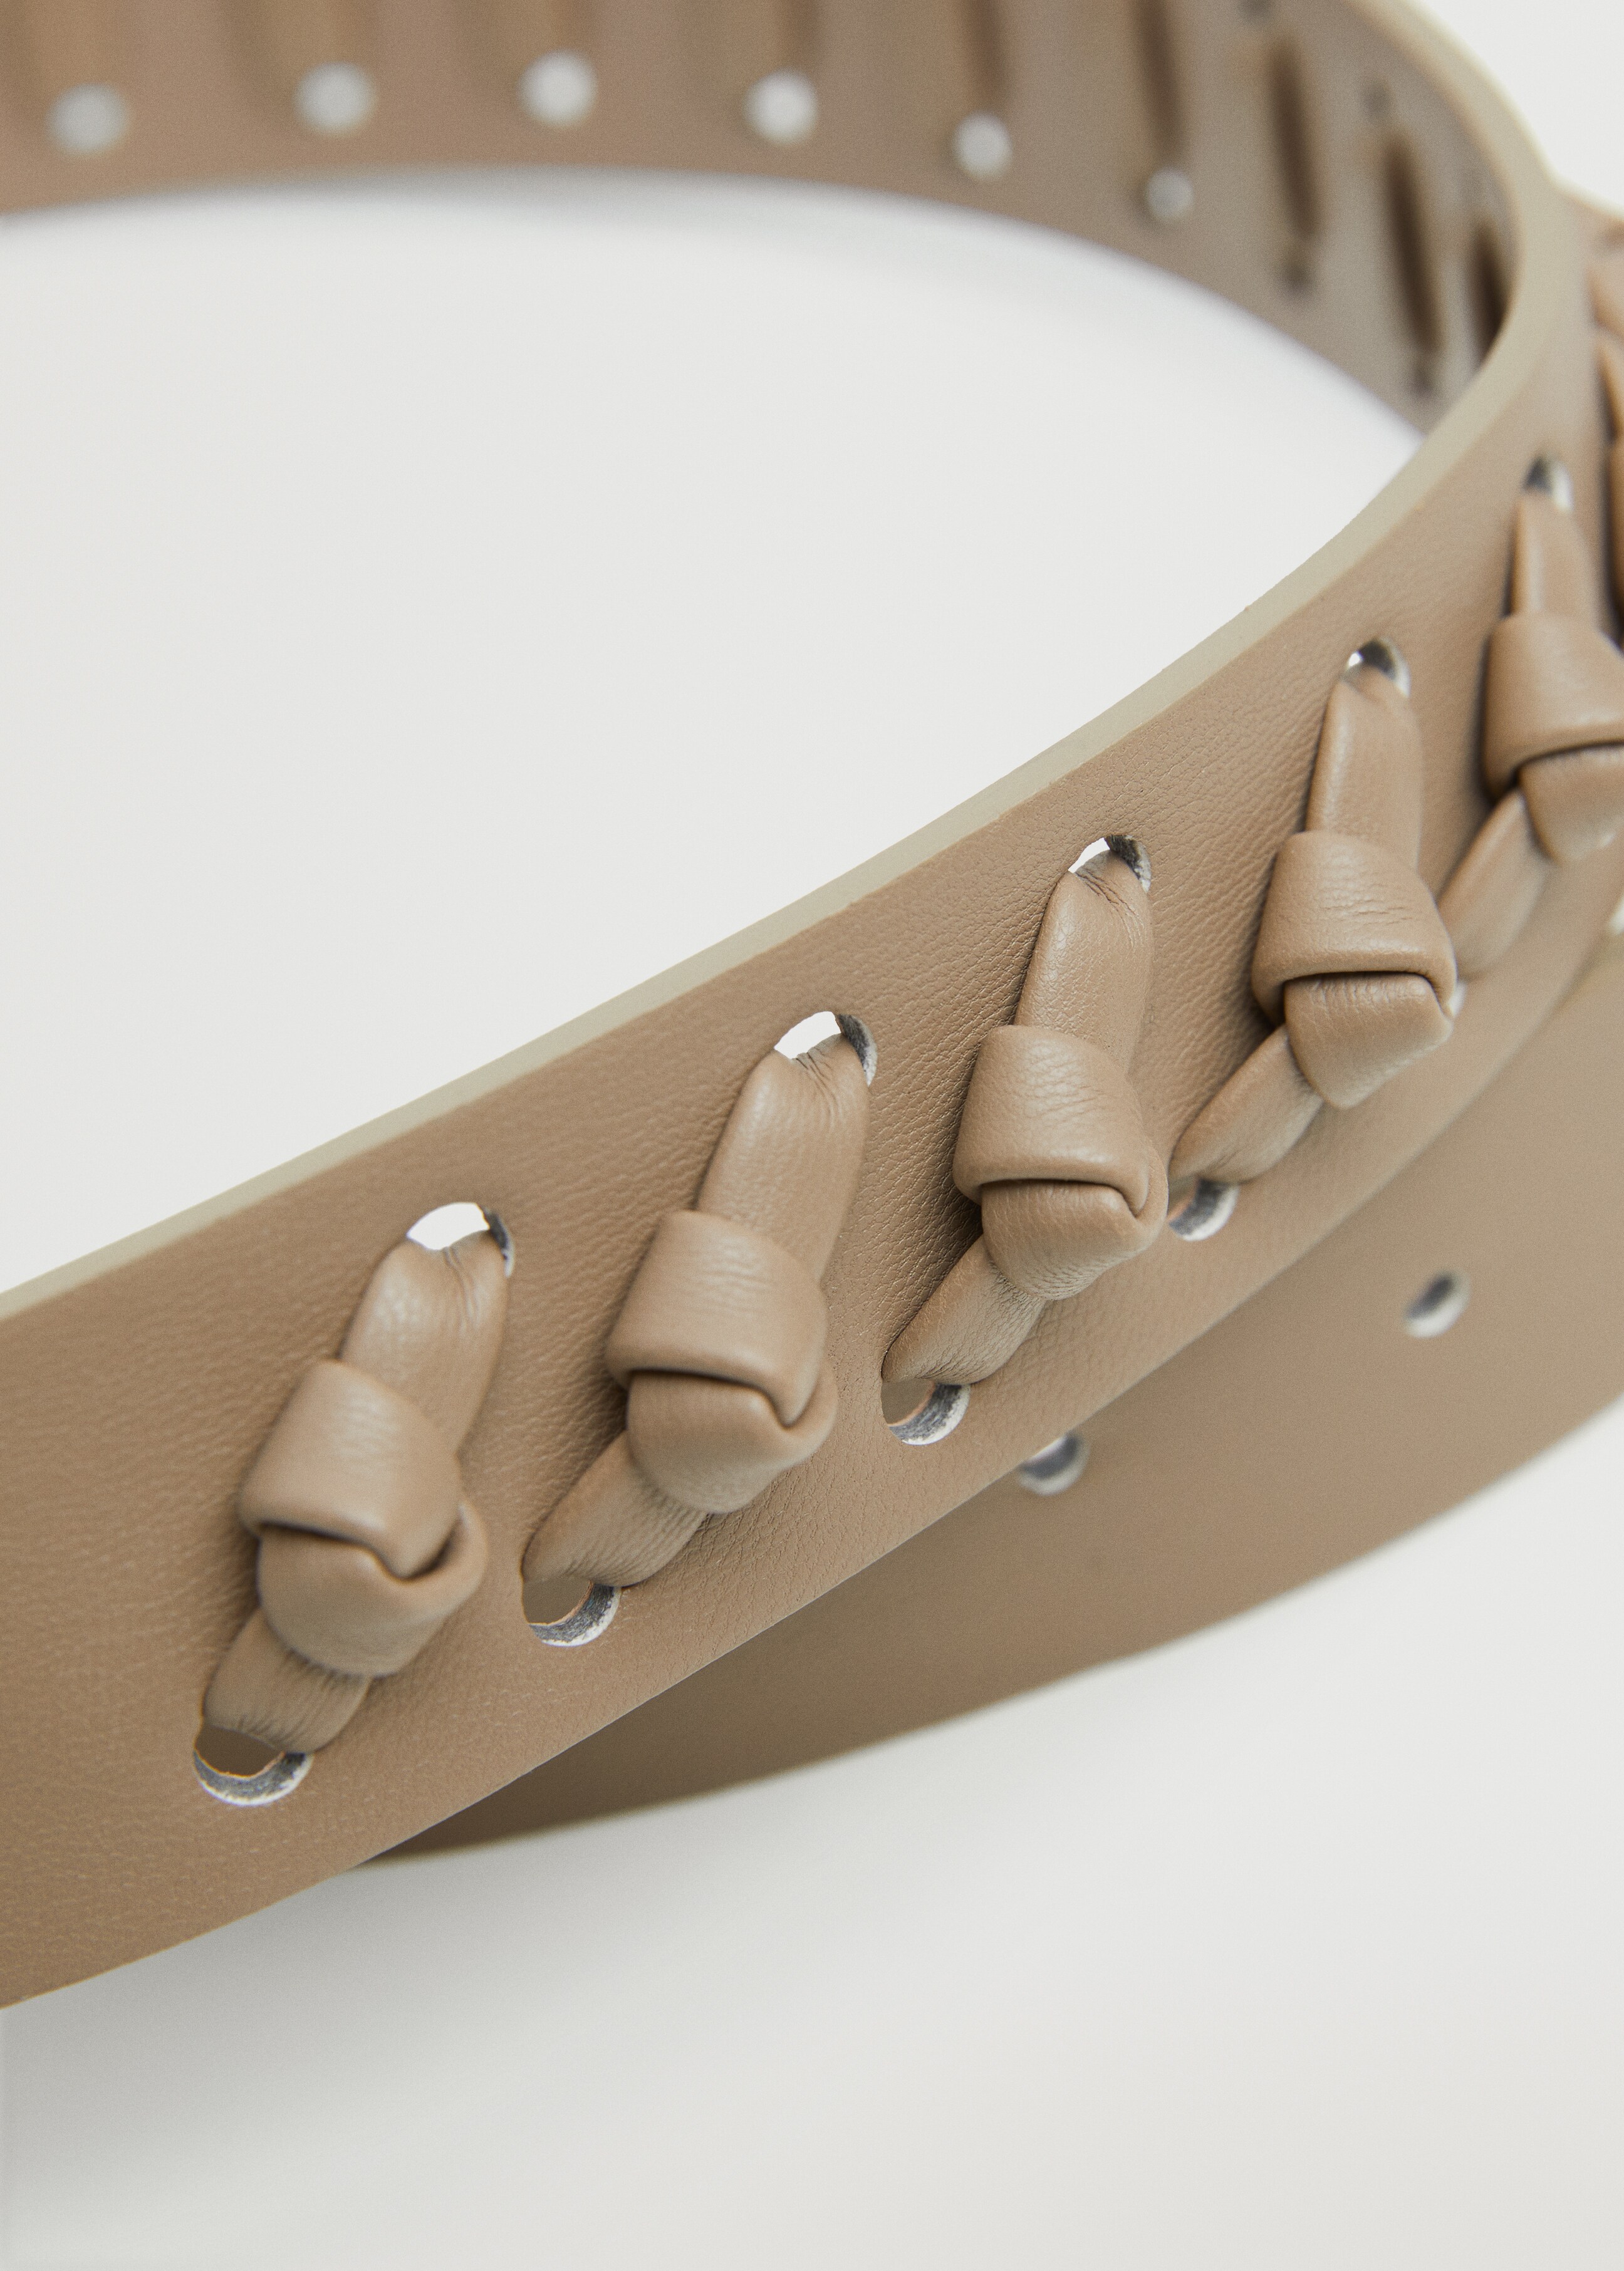 Braided belt - Details of the article 3